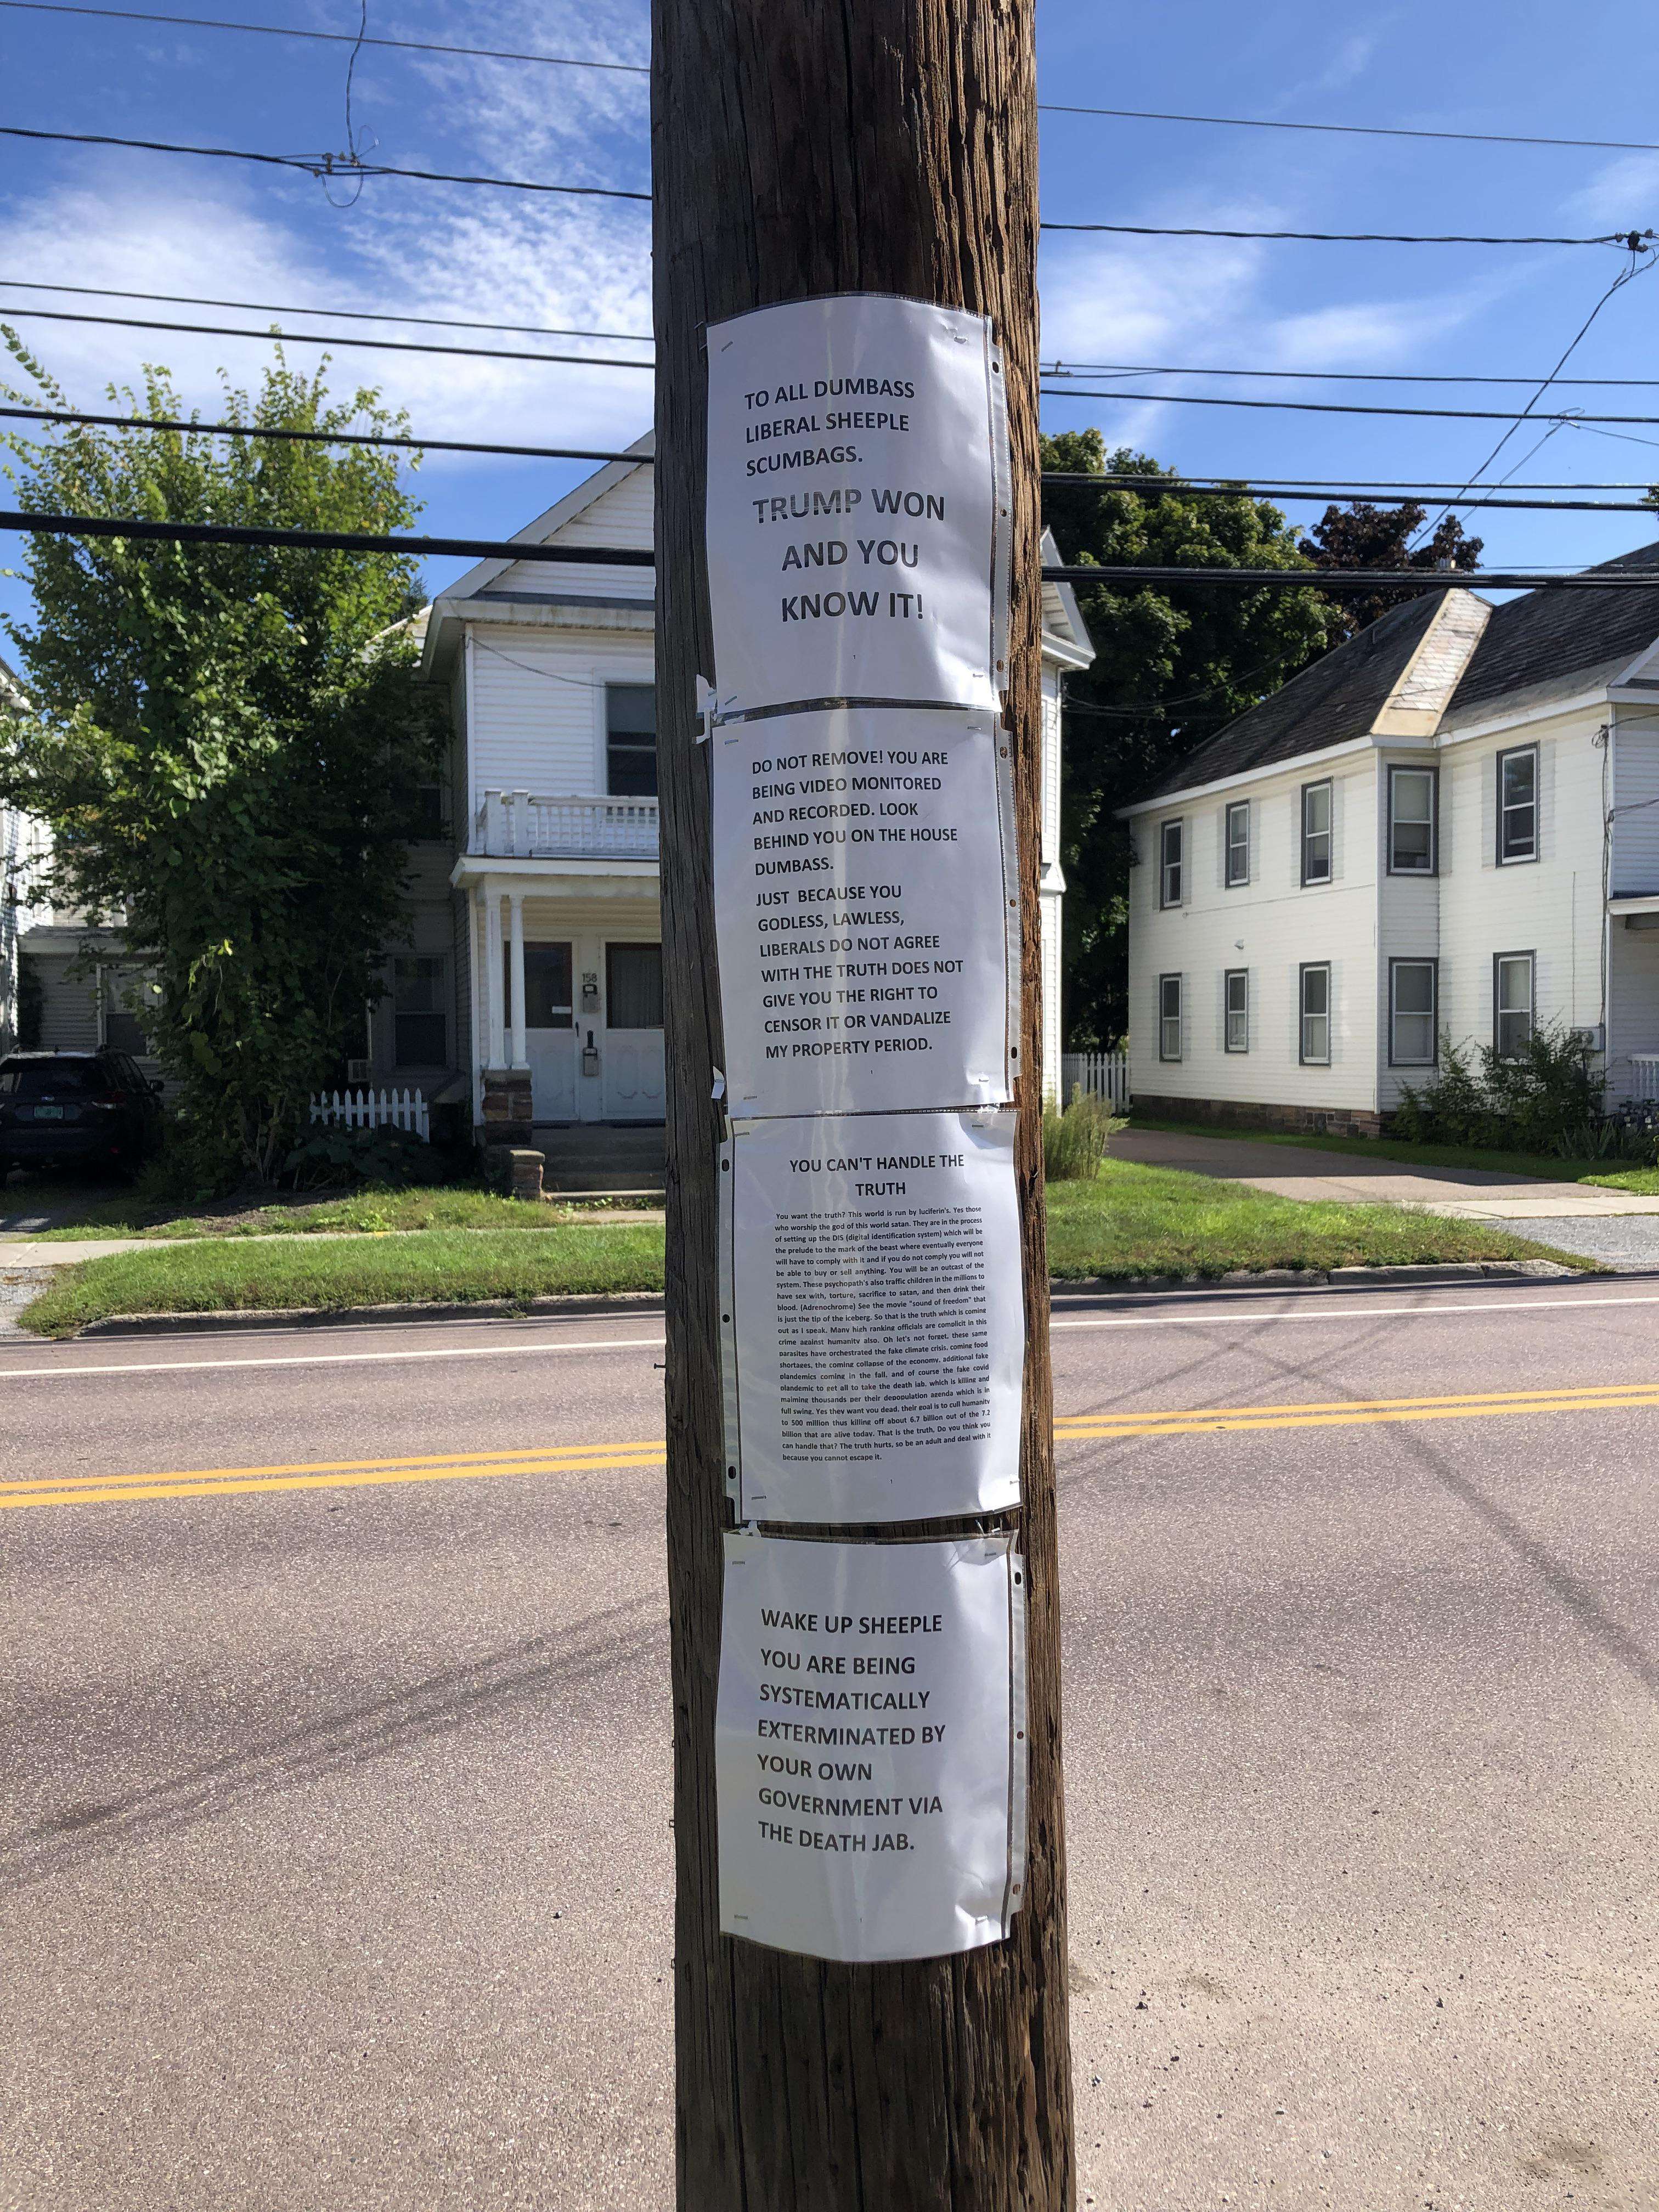 image showing Zoom in for a real dose of nonsense. Seen on a telephone pole in my neighborhood.